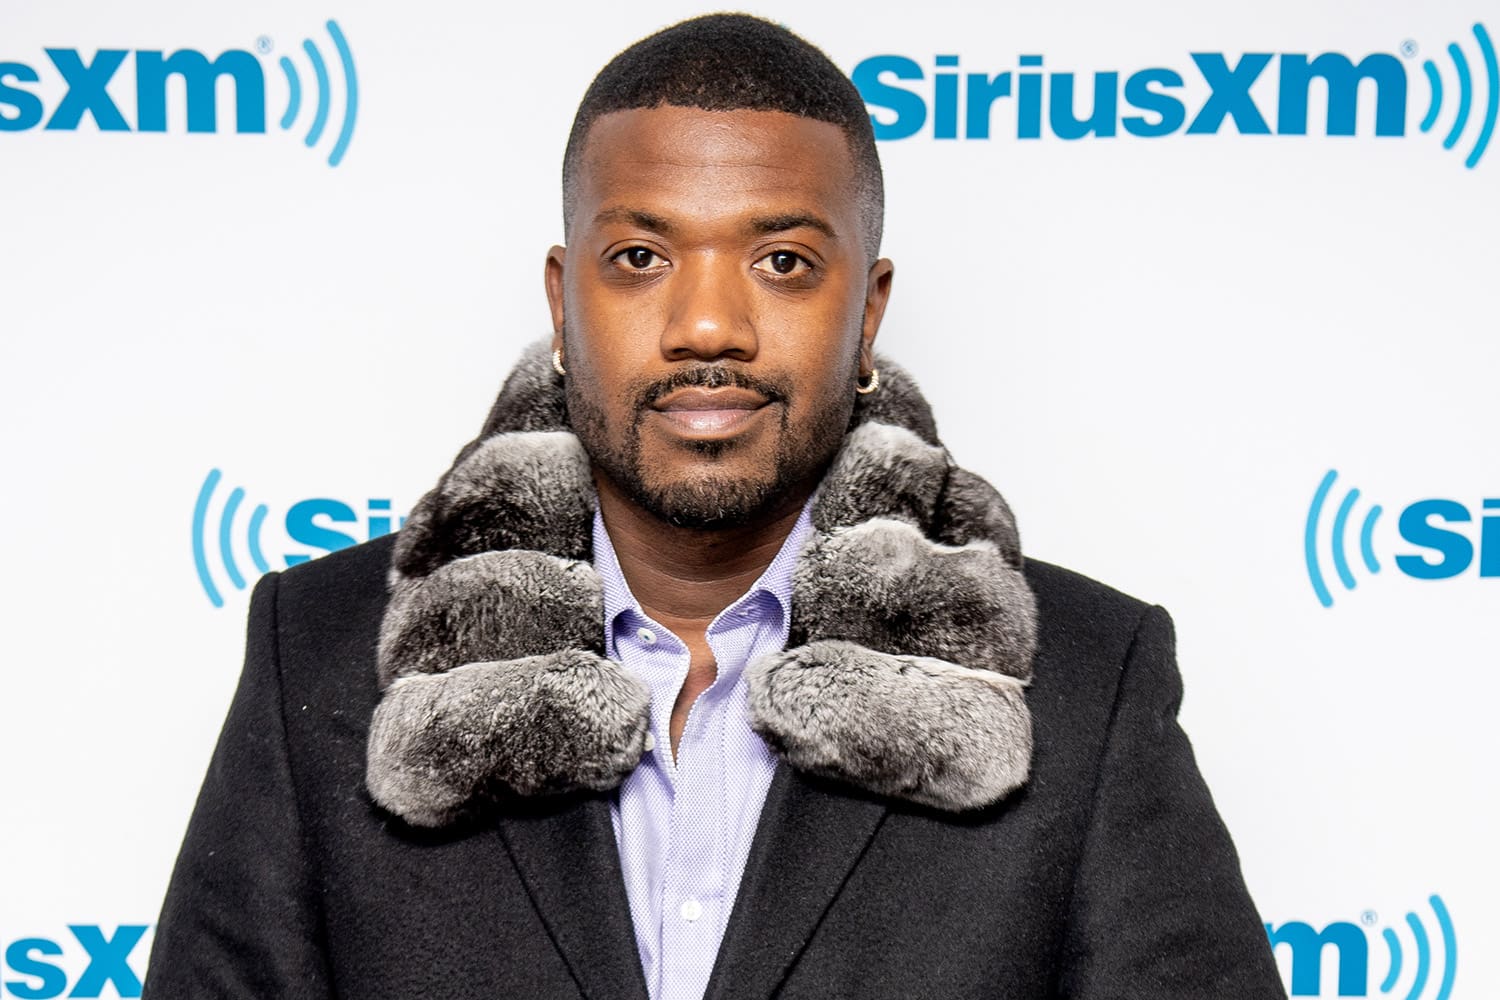 Ray J Has Gotten A Tattoo Of His Sister Brandy On His Leg And People Are Conflicted On How To Feel About It